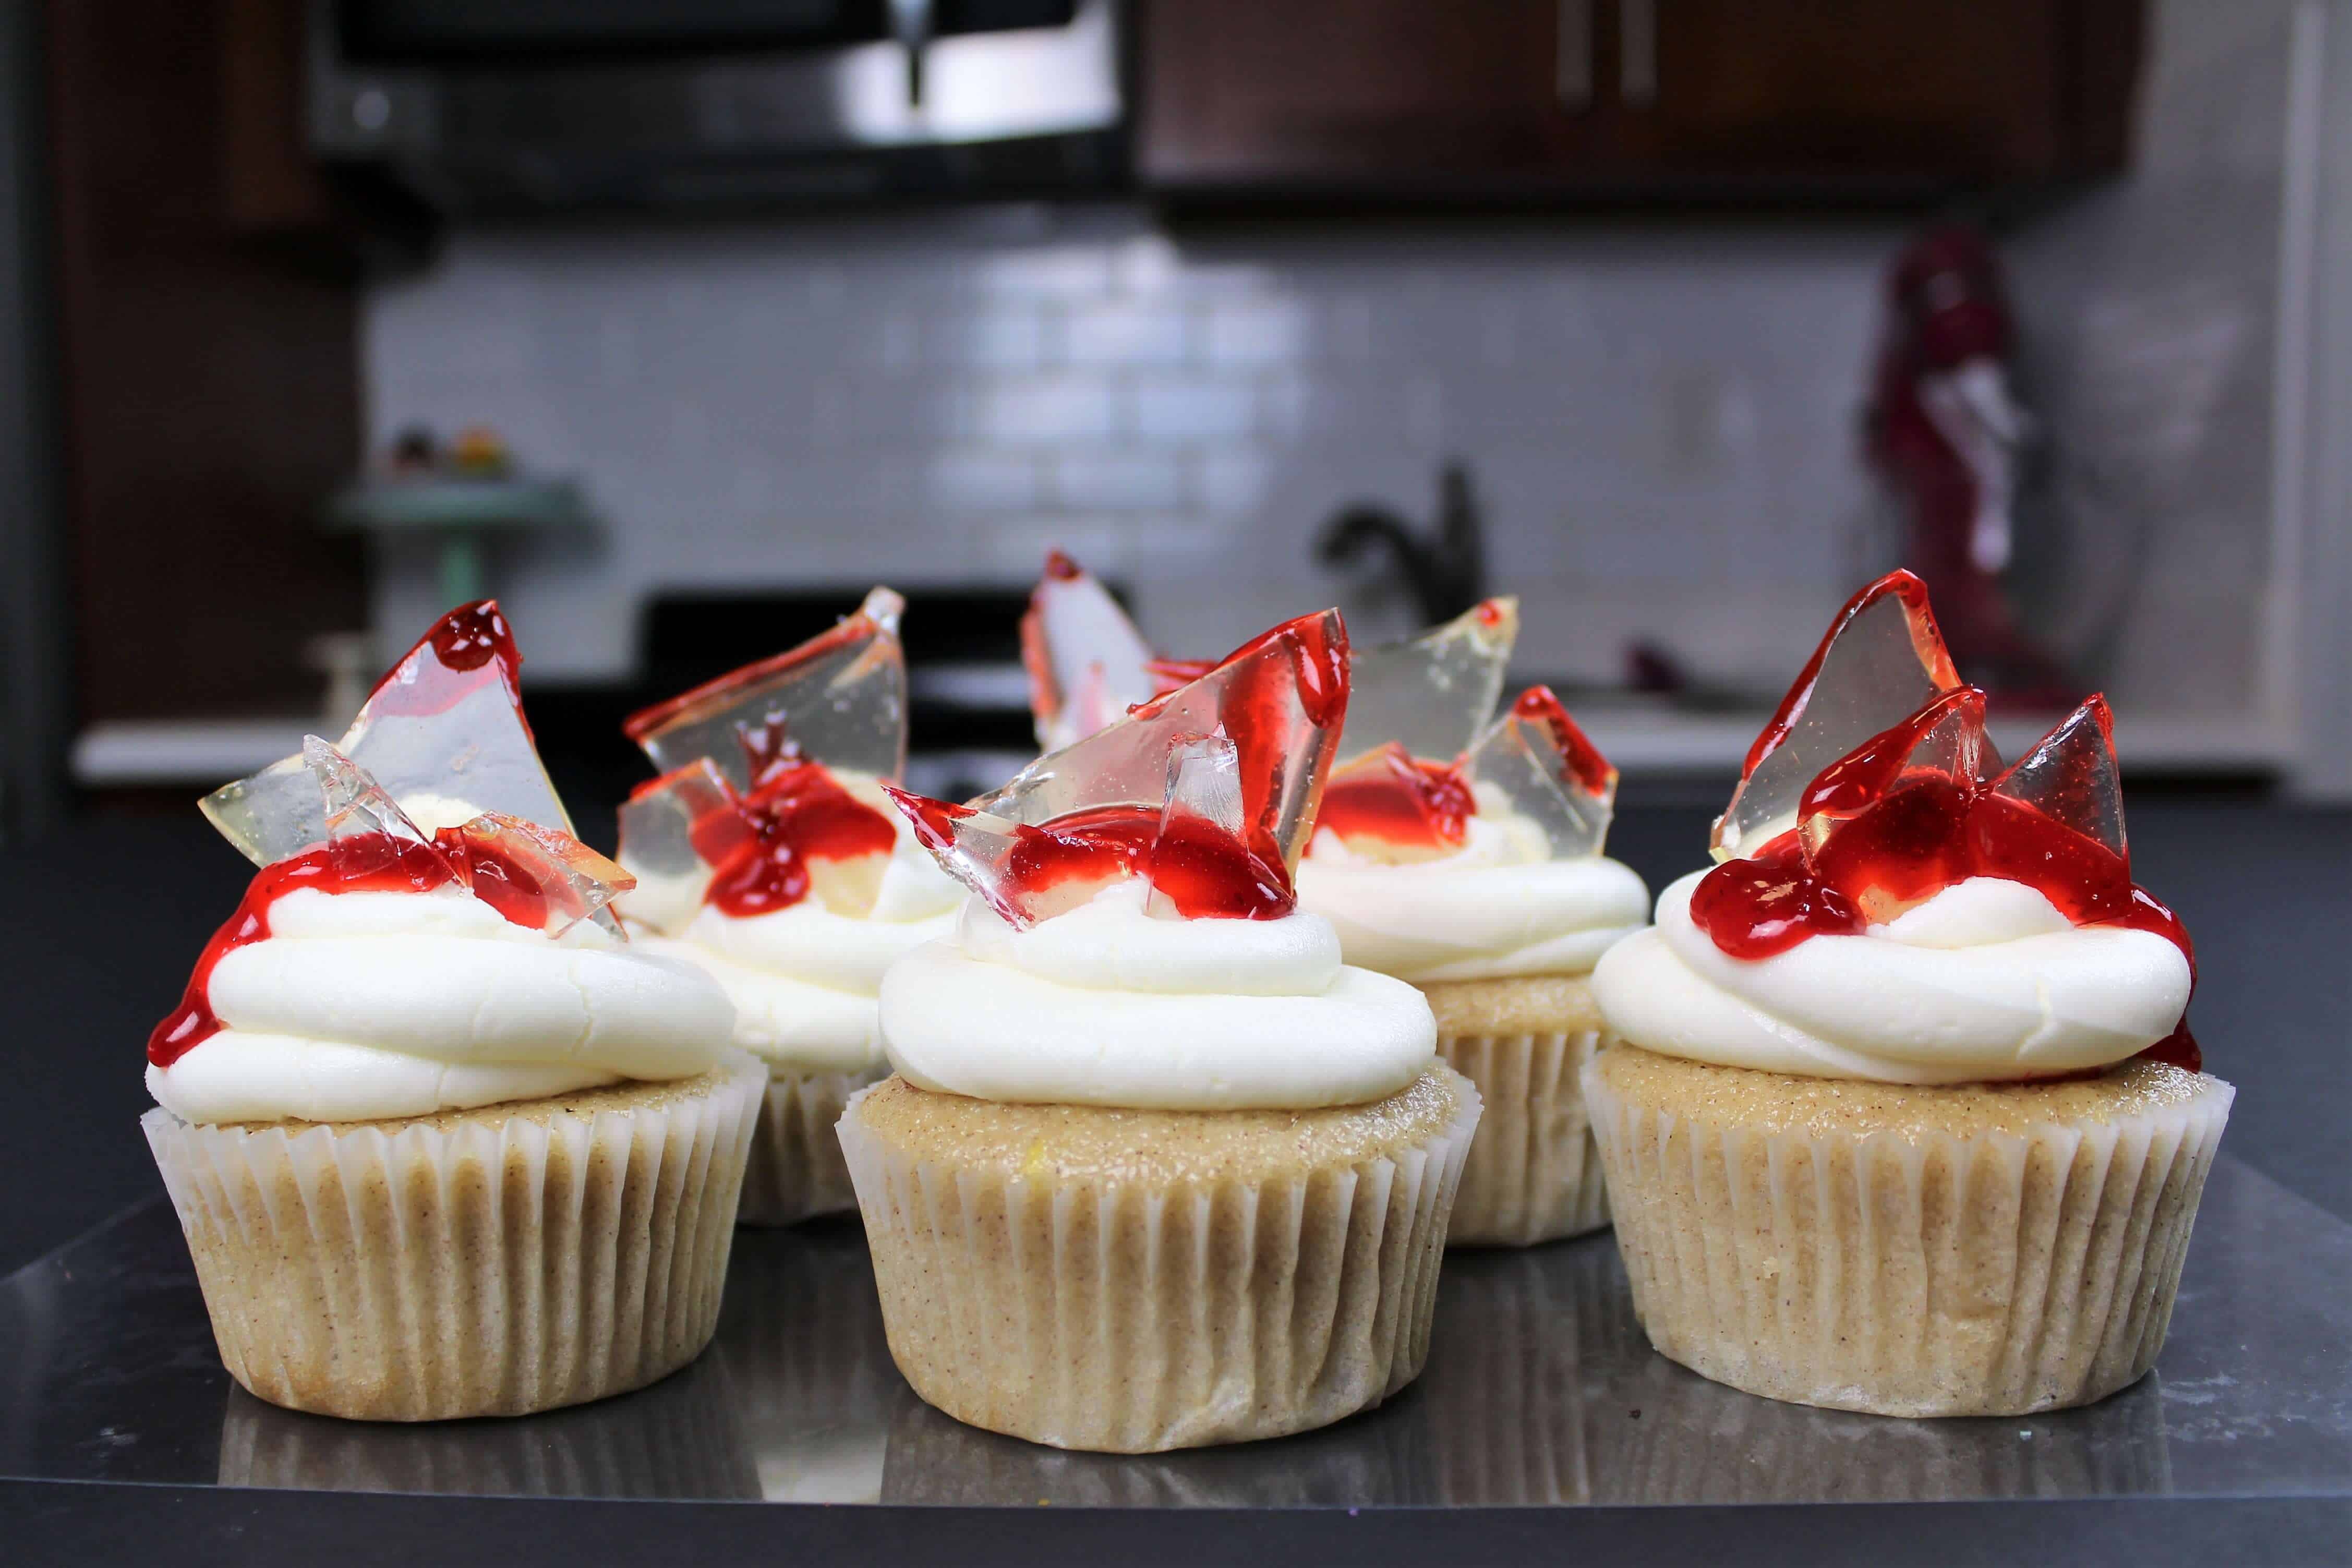 photo of shattered glass cupcakes, decorated with jam to look like blood